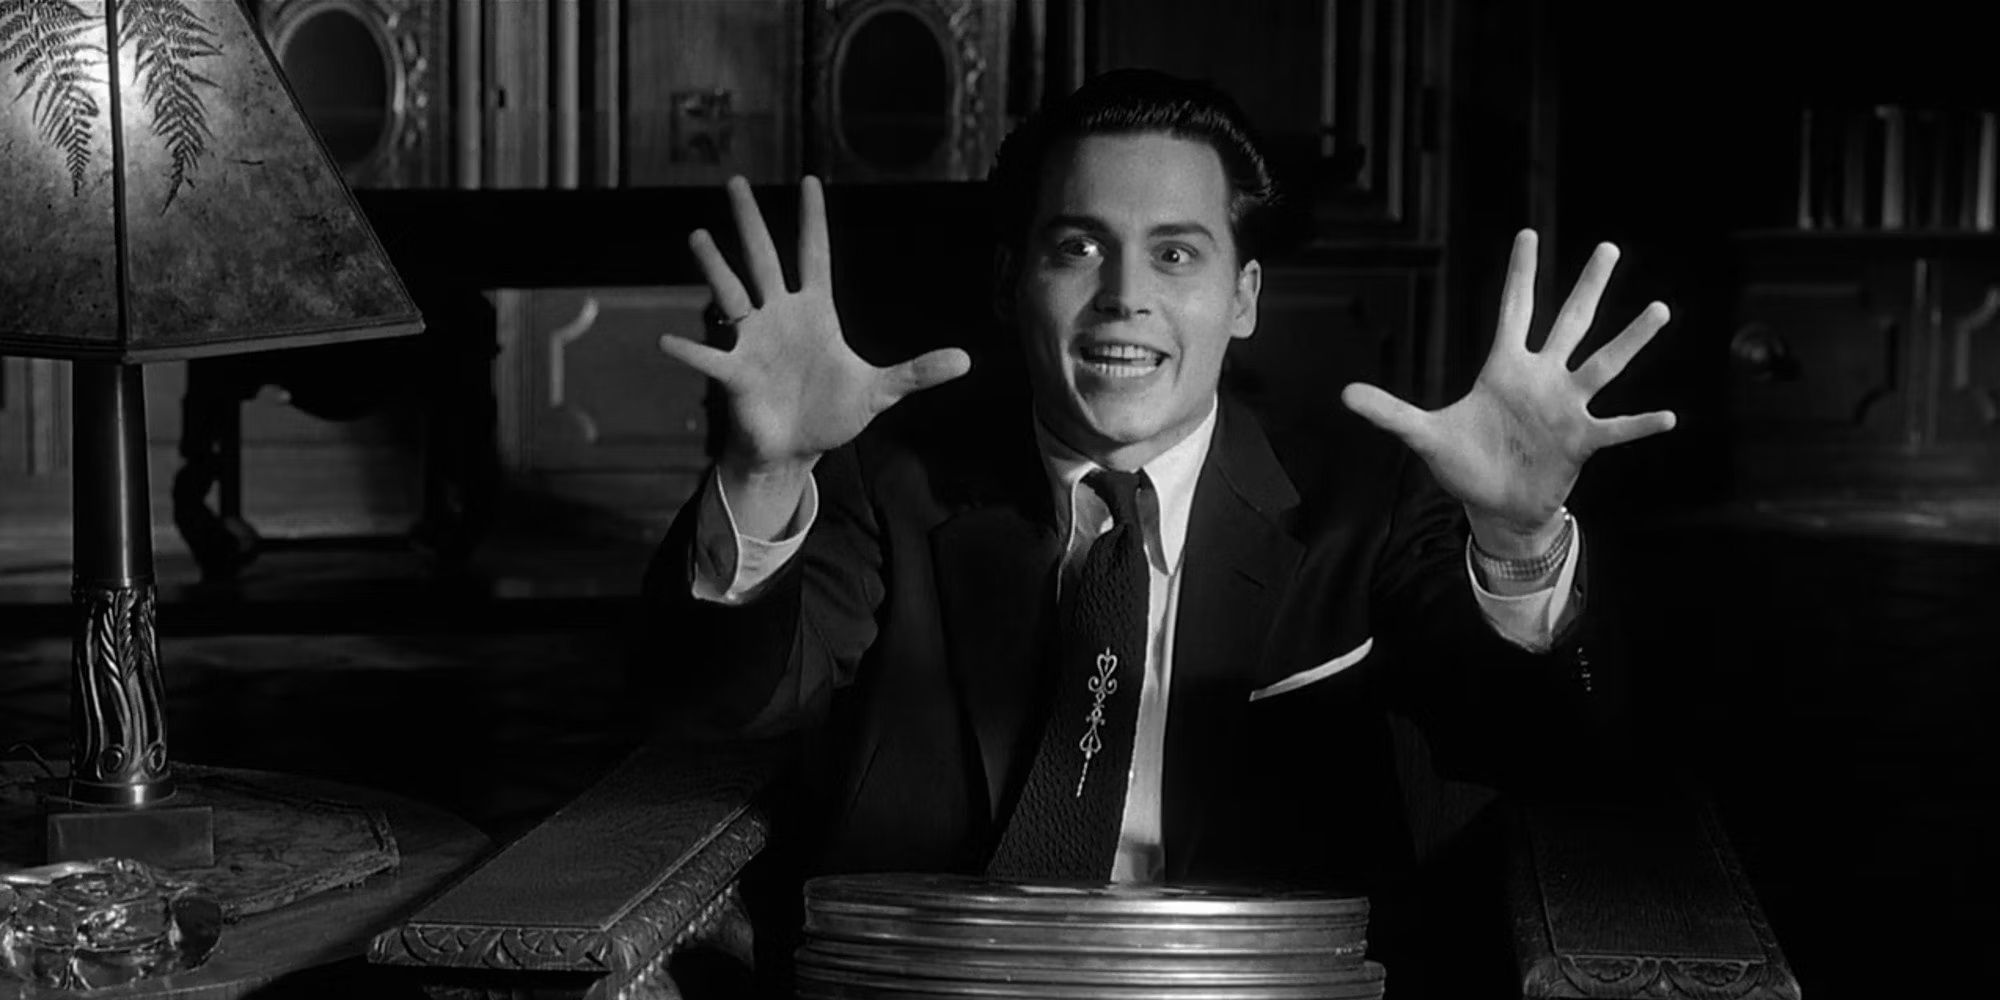 Johnny Depp as Ed Wood making a movement with his hands while smiling